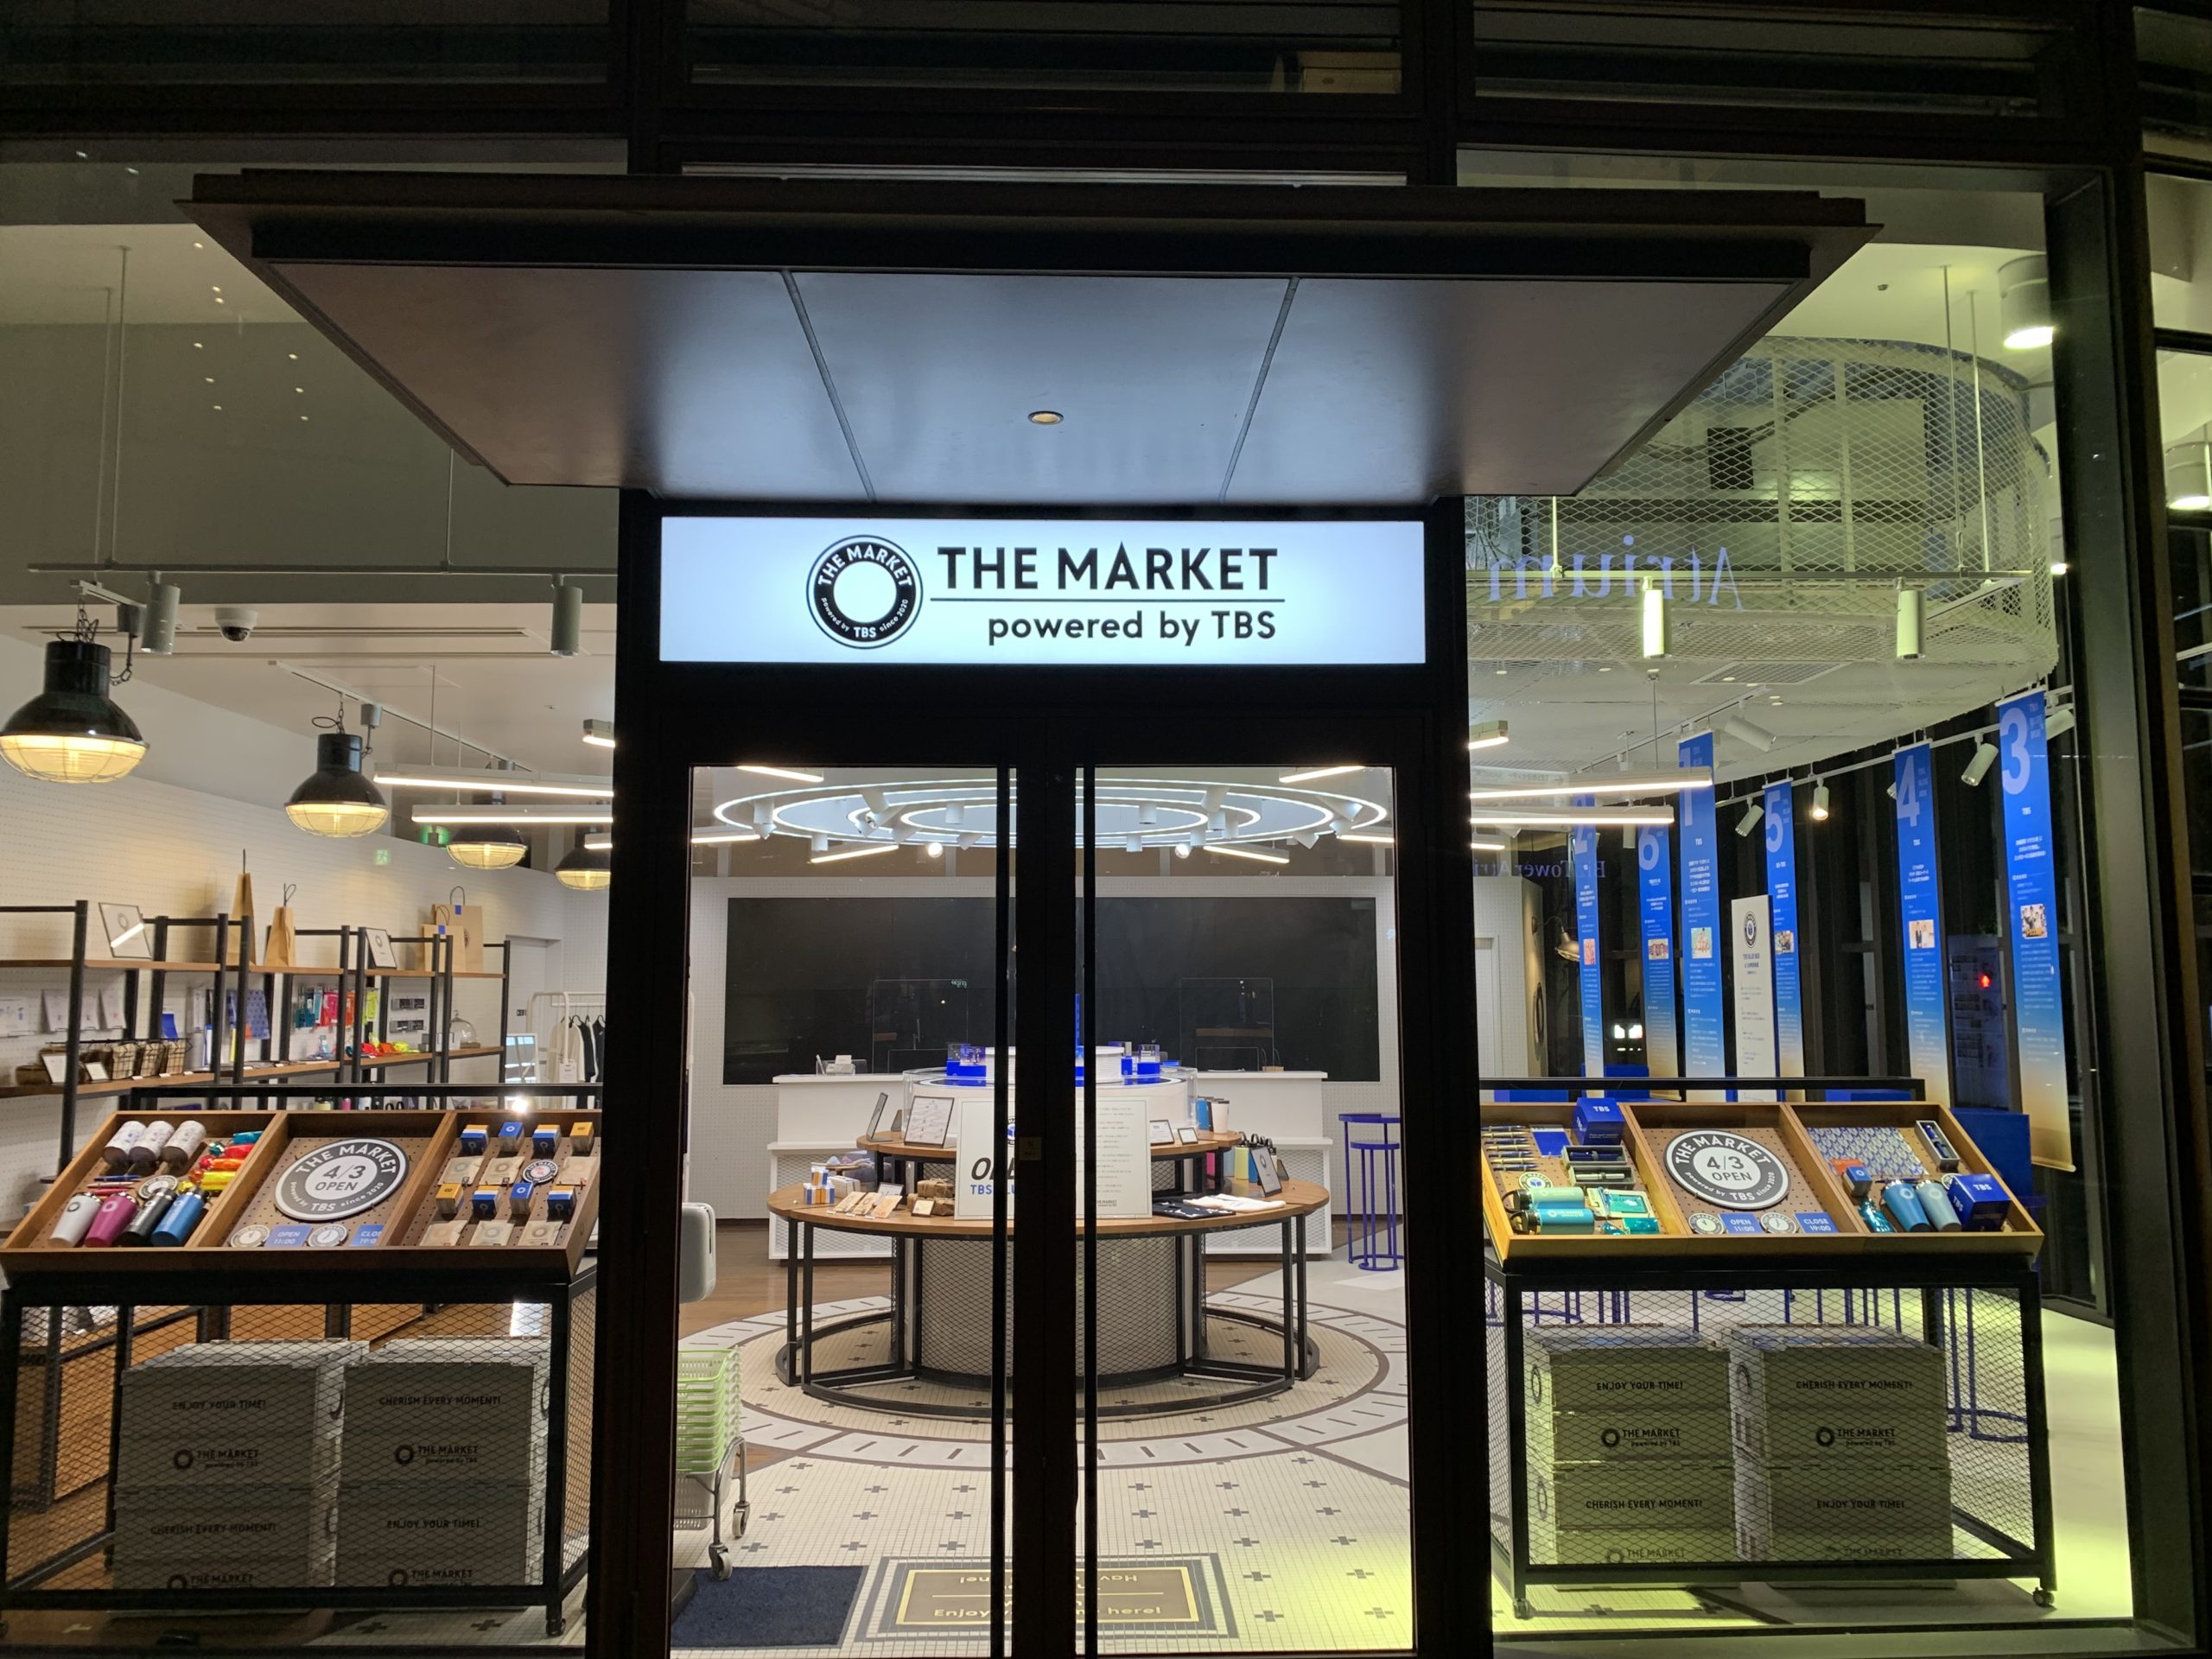 THE MARKET powered by TBSが2021年4月3日（土）にオープン